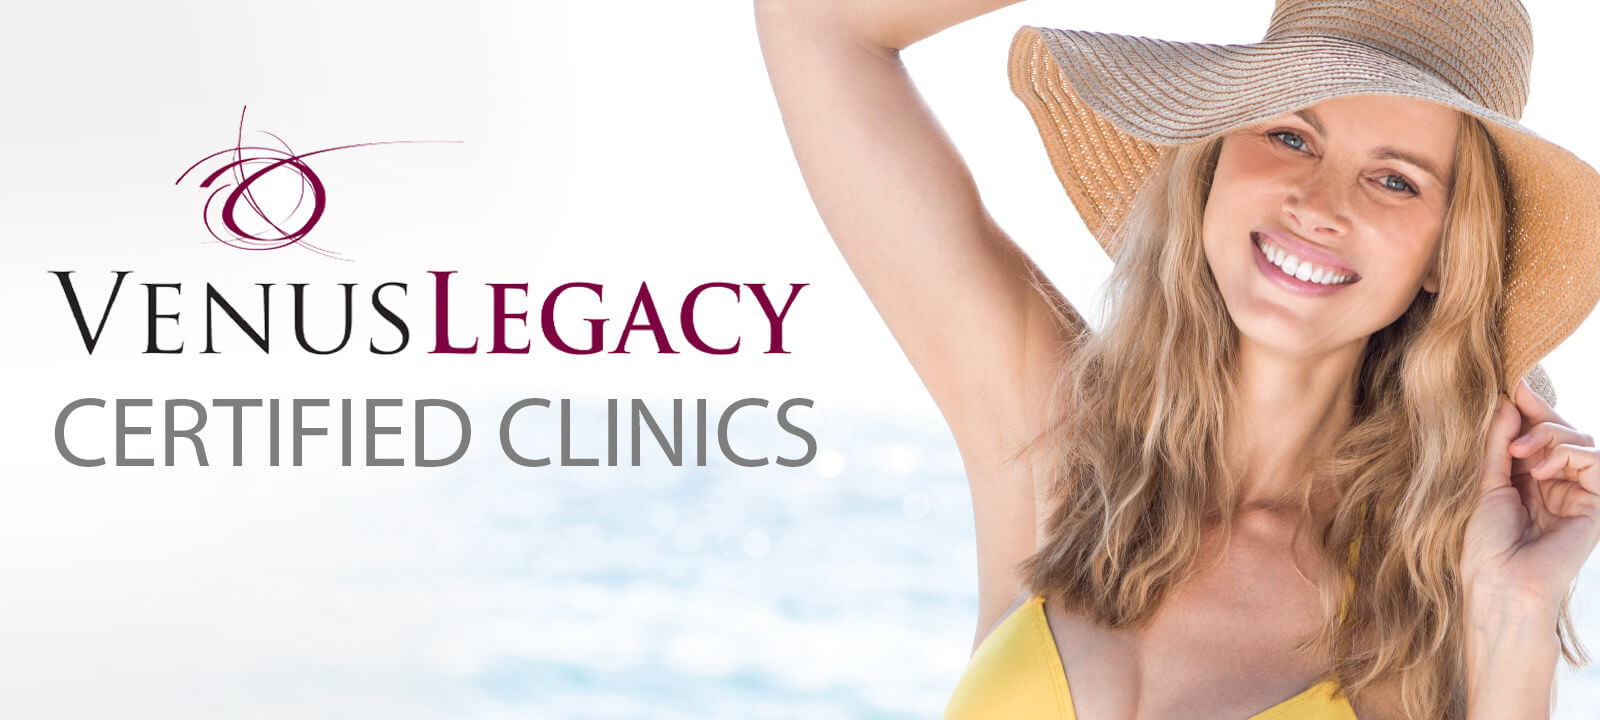 VENUS LEGACY Body Contouring - Beauty Lounge in San Marcos, CA